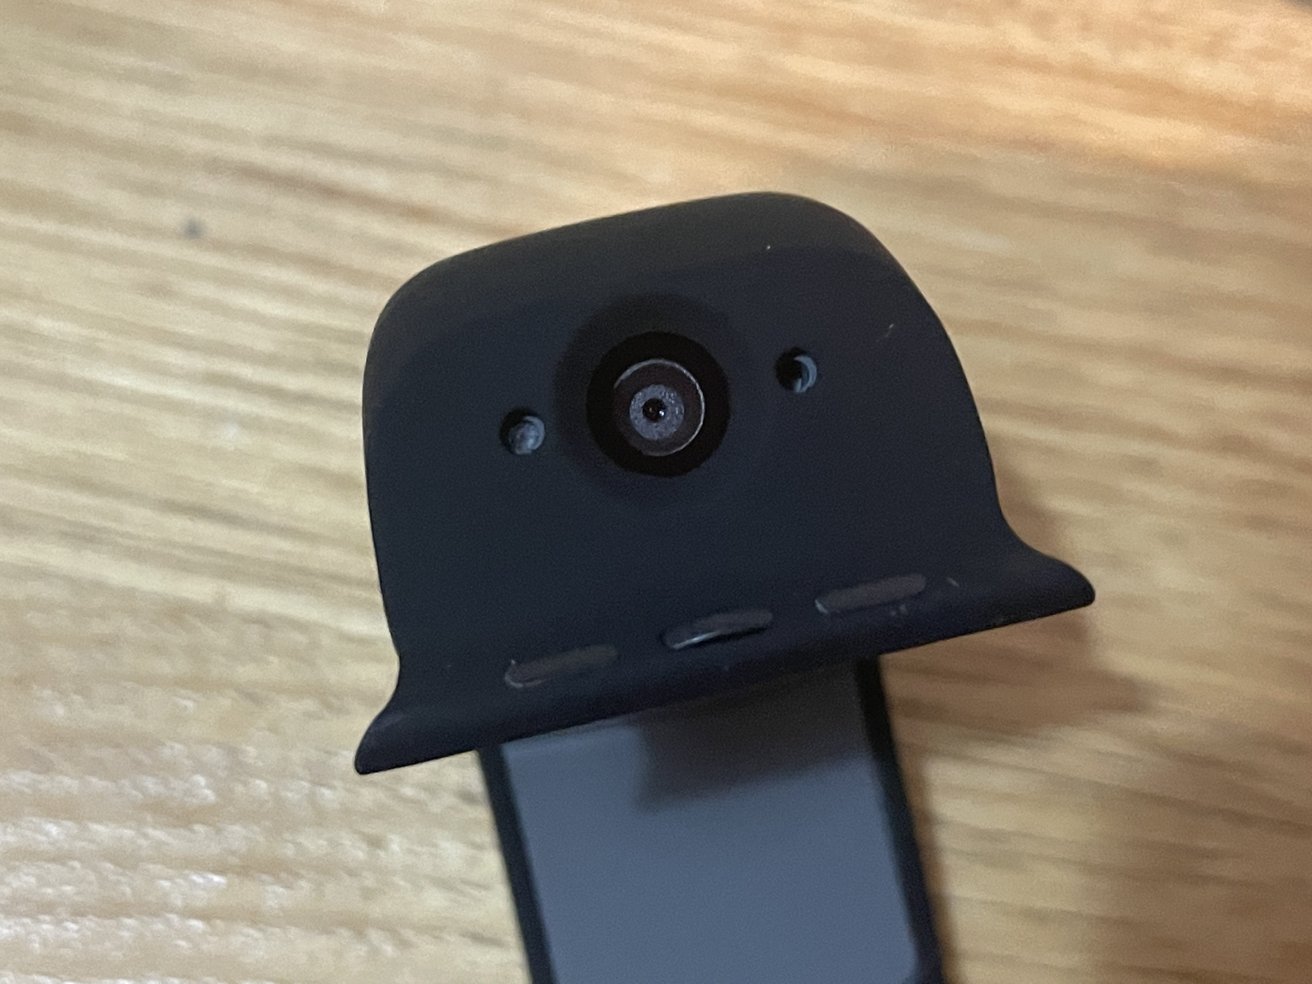 The camera unit for the Wristcam sits above the Apple Watch display.